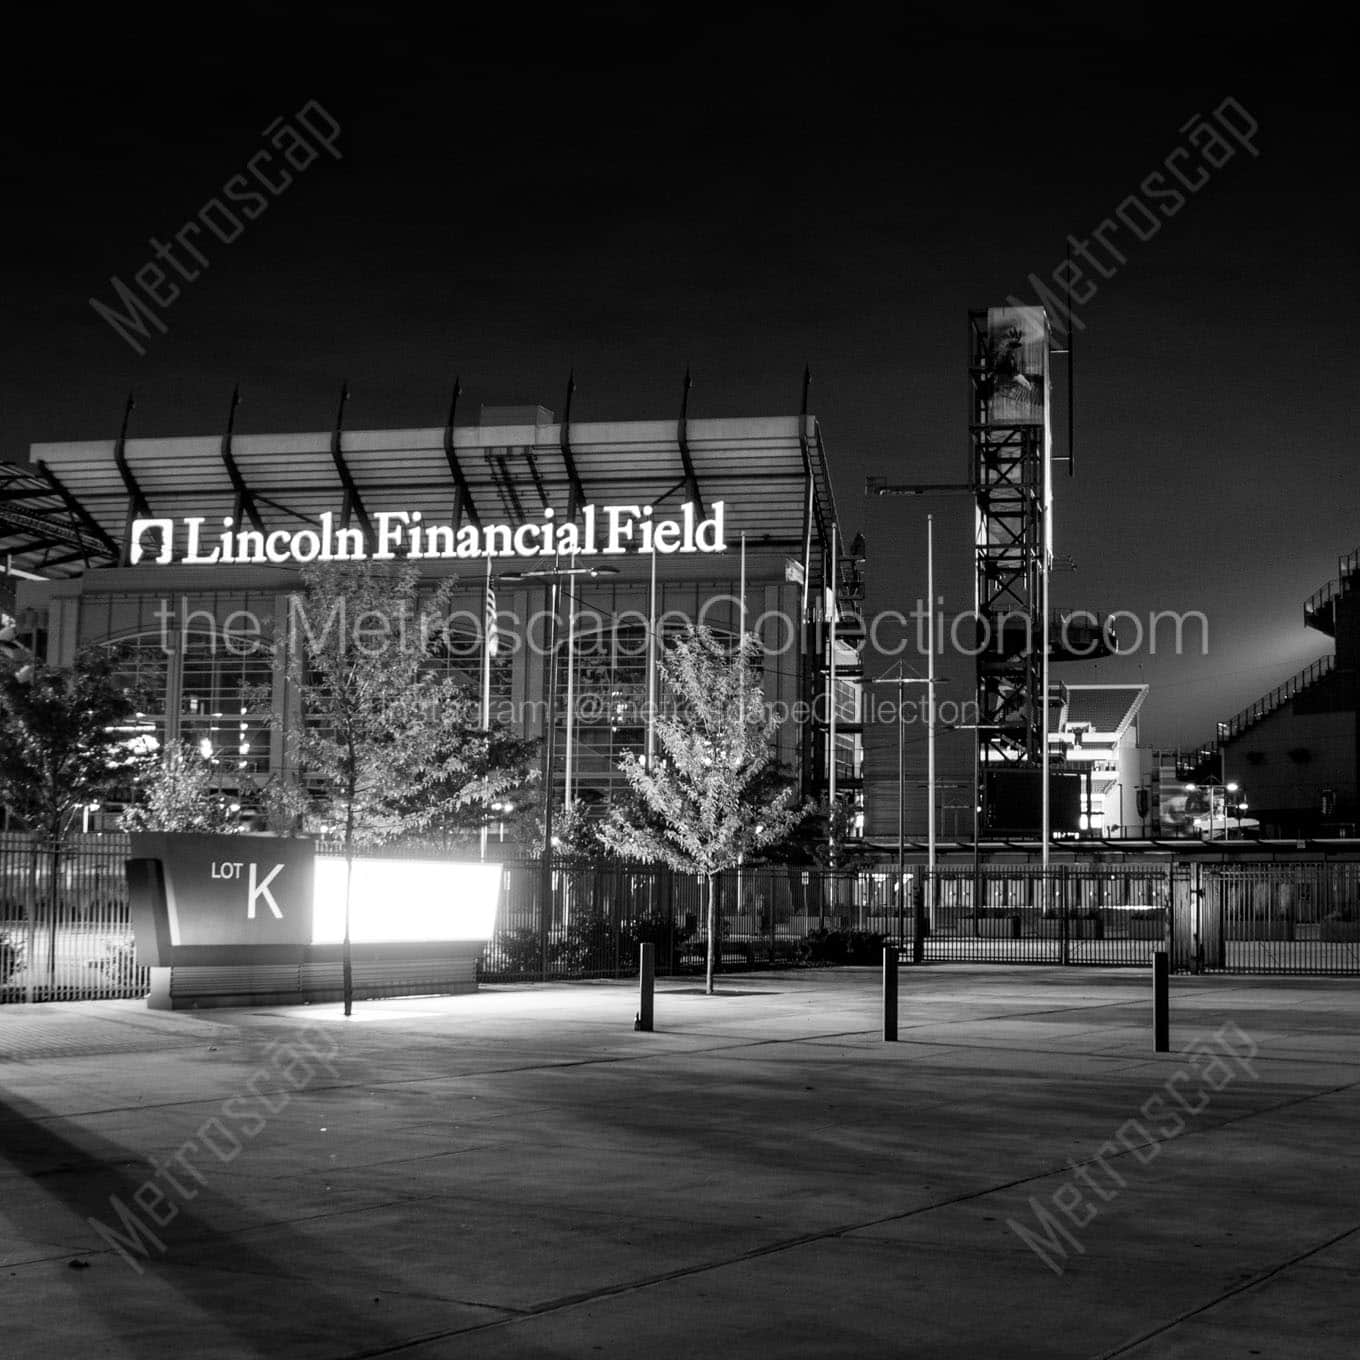 lincoln financial field at night Black & White Office Art